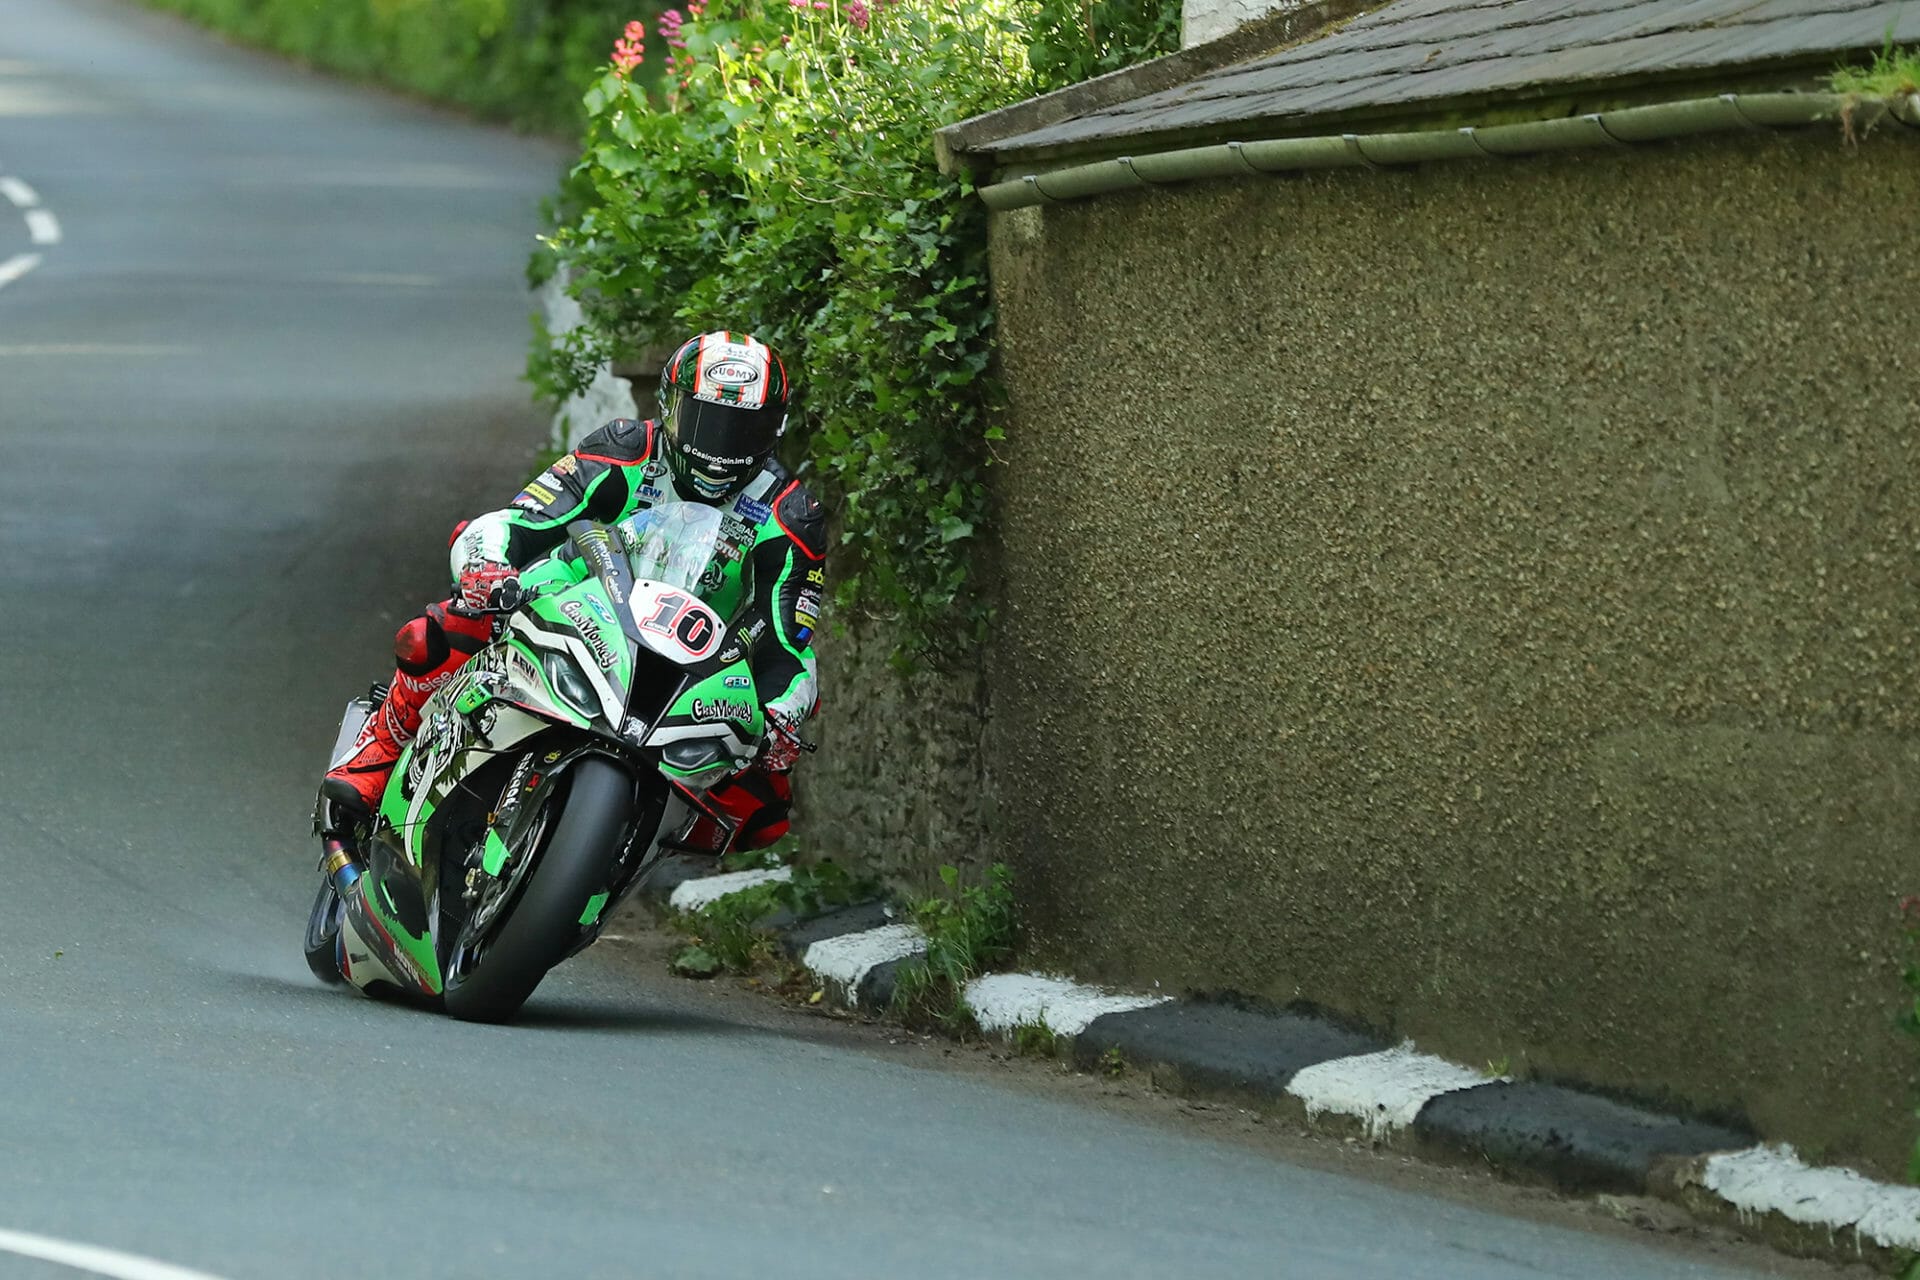 TT - Peter Hickman dominates the practice sessions - MOTORCYCLES.NEWS